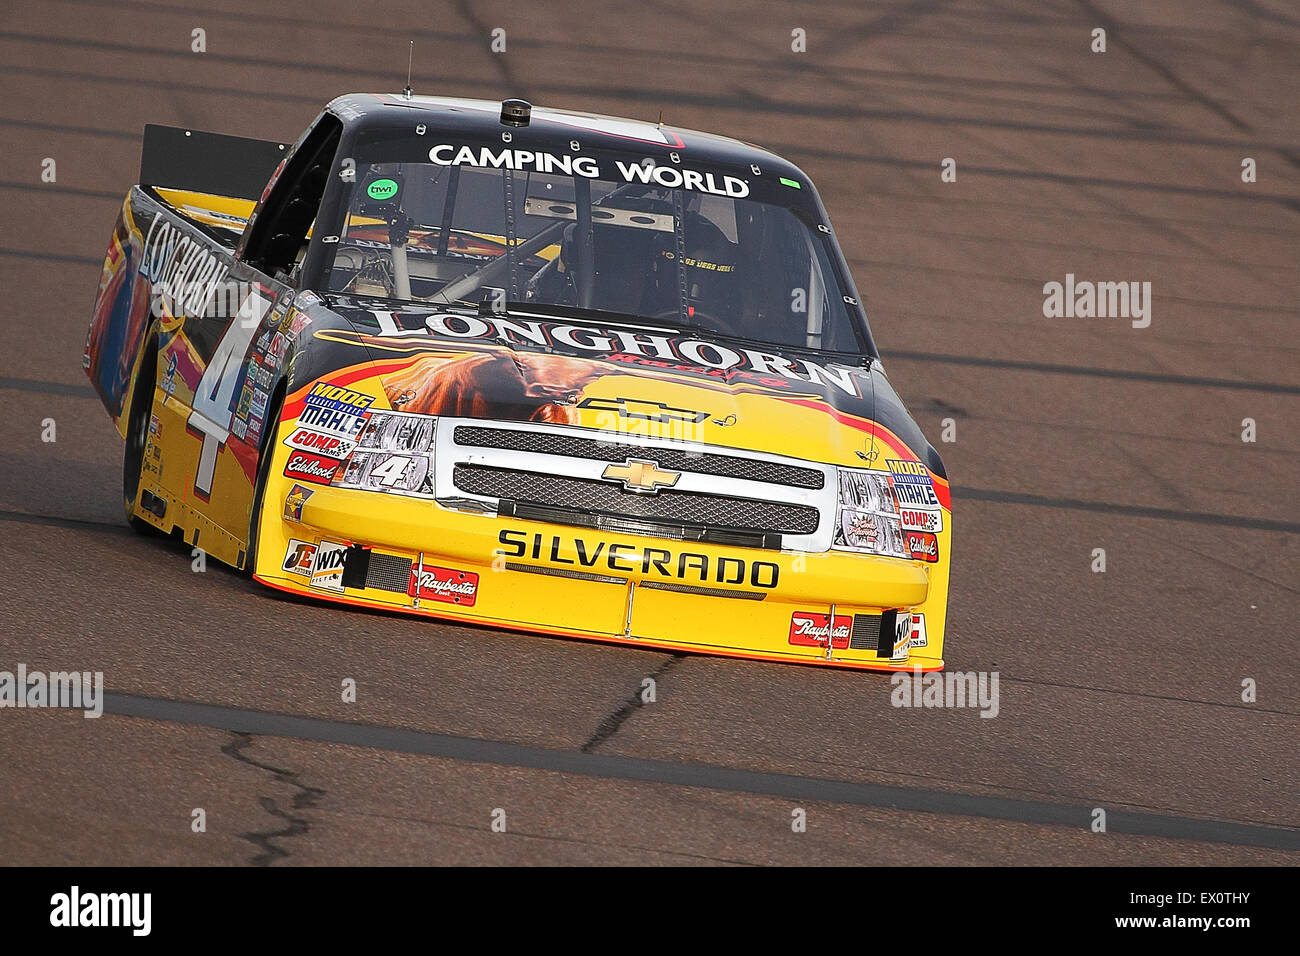 AVONDALE, AZ - NOV. 12: Kevin Harvick (4) takes laps in a practice session for the NASCAR Camping World Truck Series Stock Photo